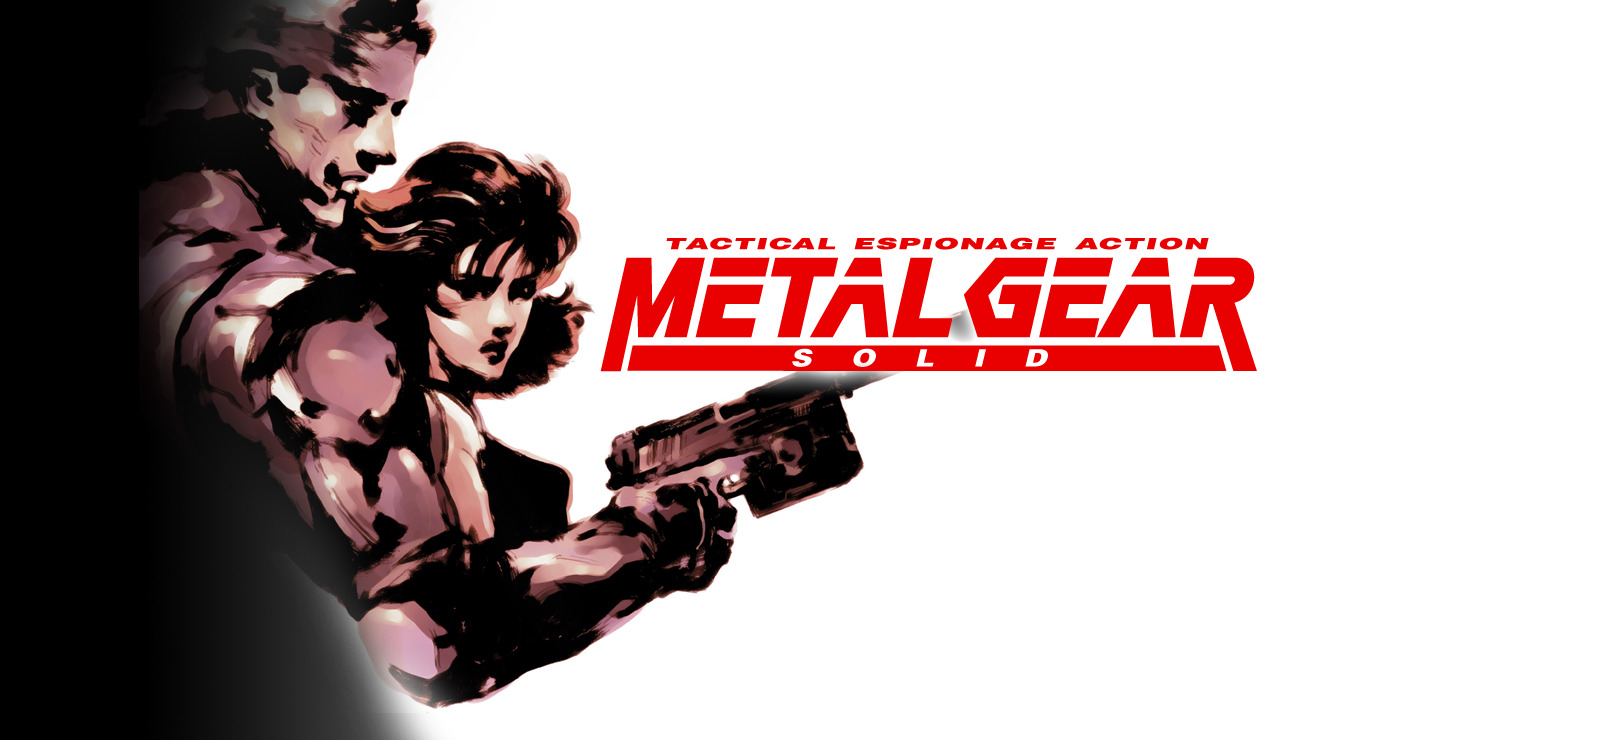 Best of Metal gear solid pictures